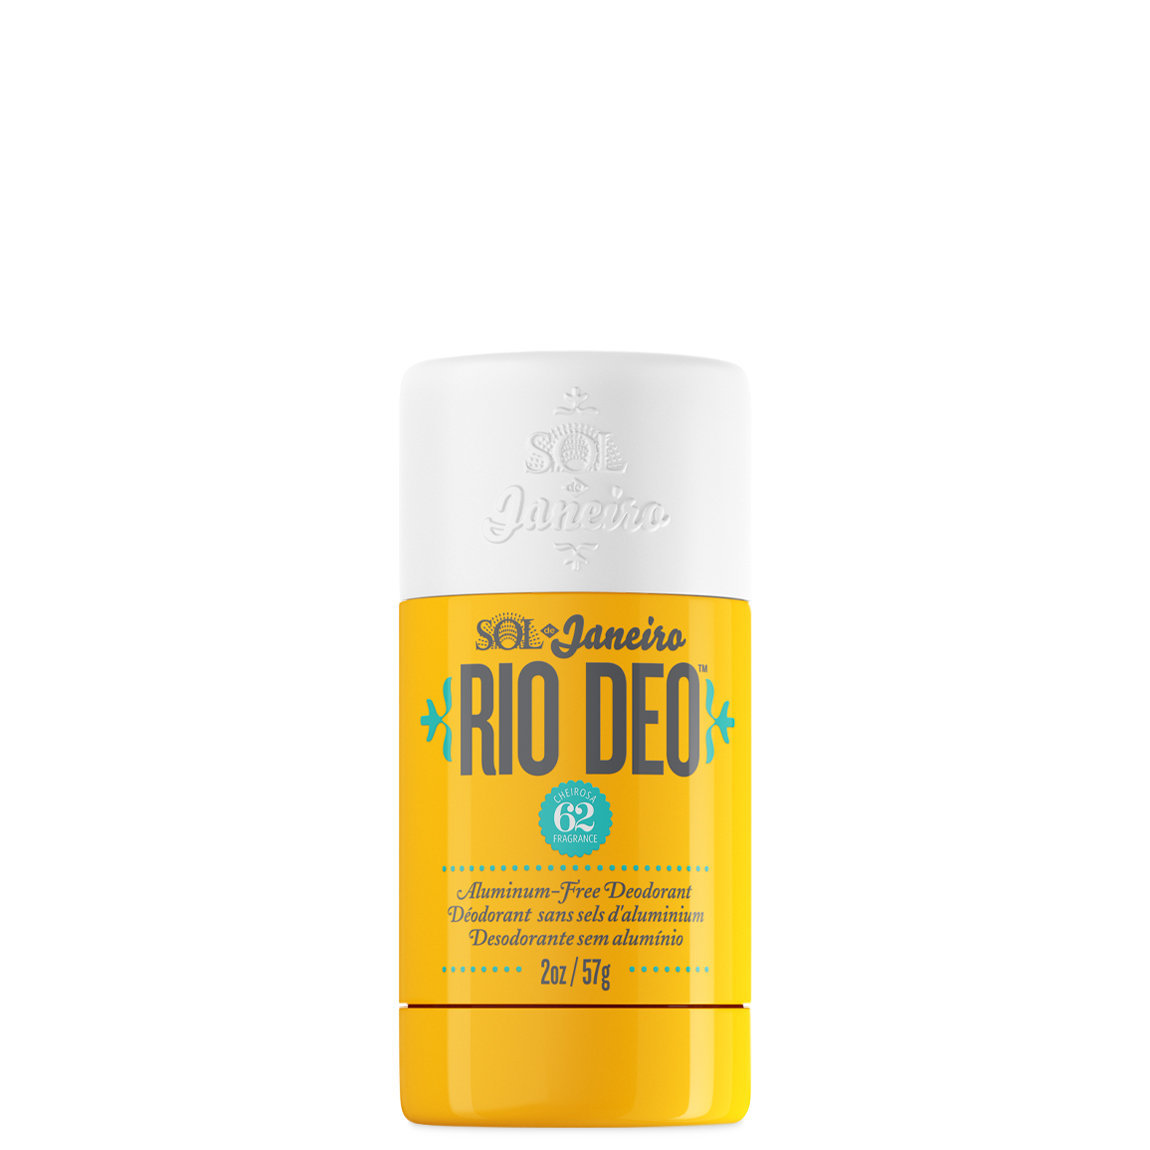 Rio Deo all day long! Our aluminum-free, baking soda-free